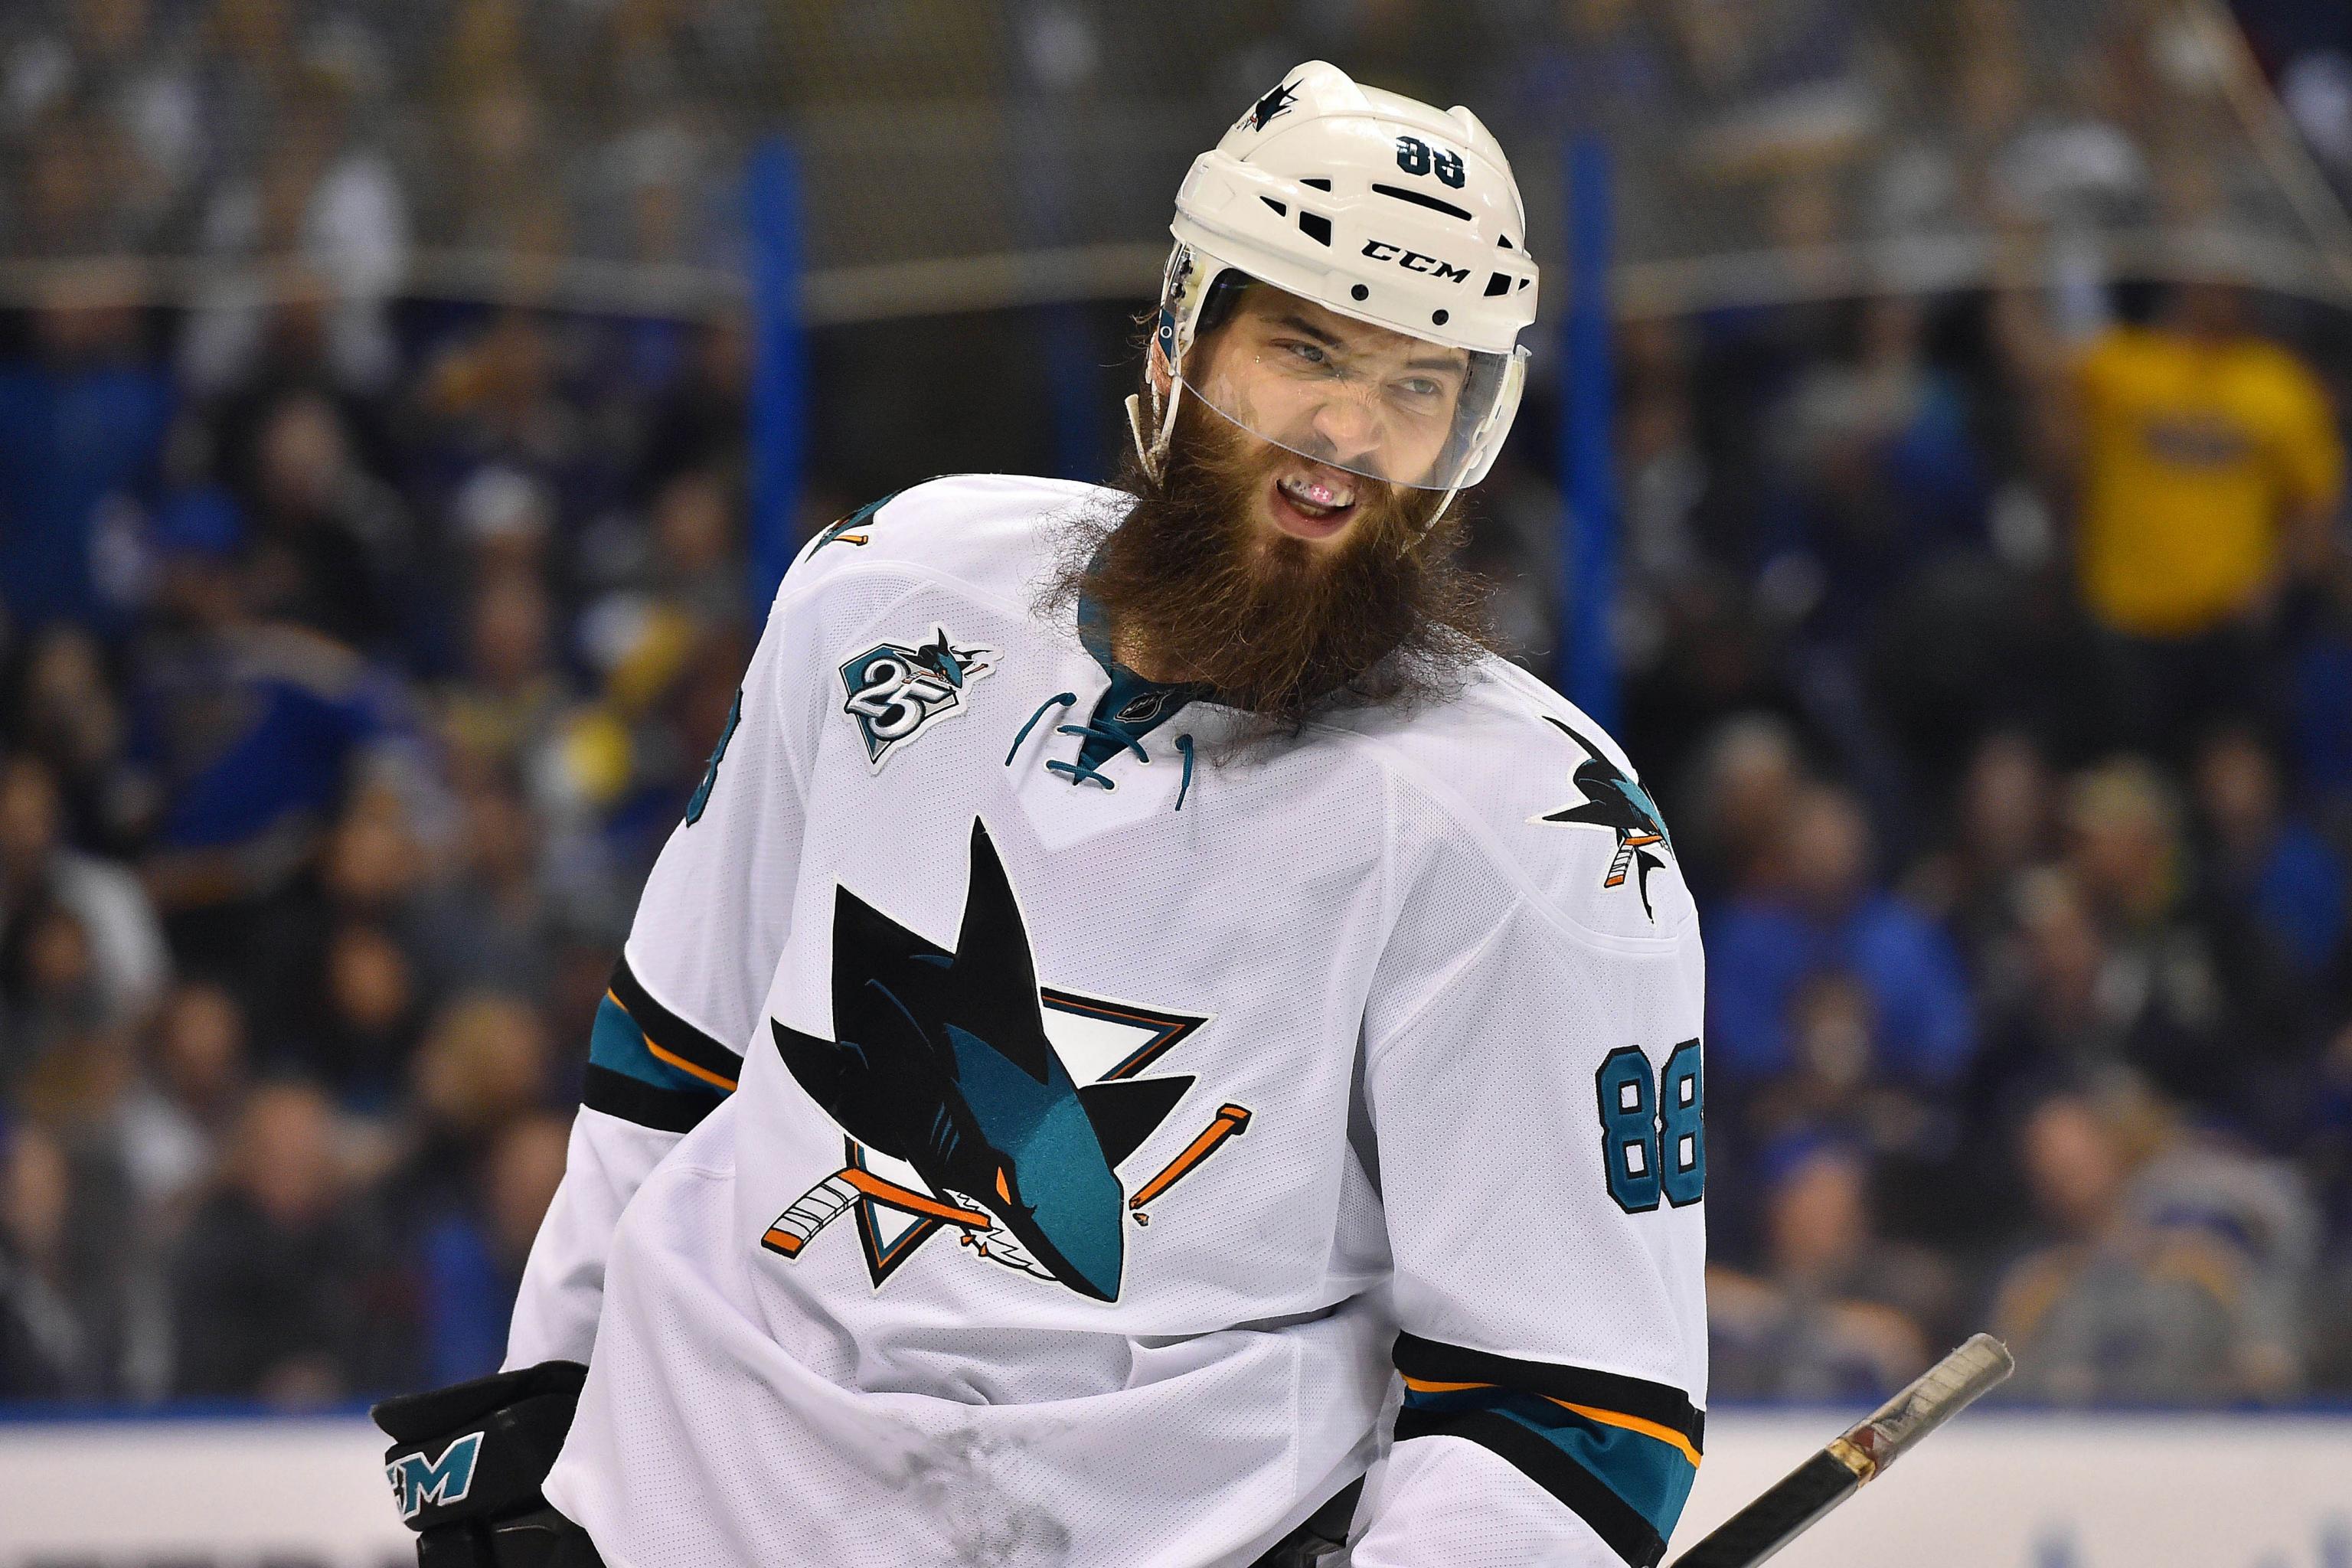 Inside the NHL: Summer vacation for Sharks' Burns included some